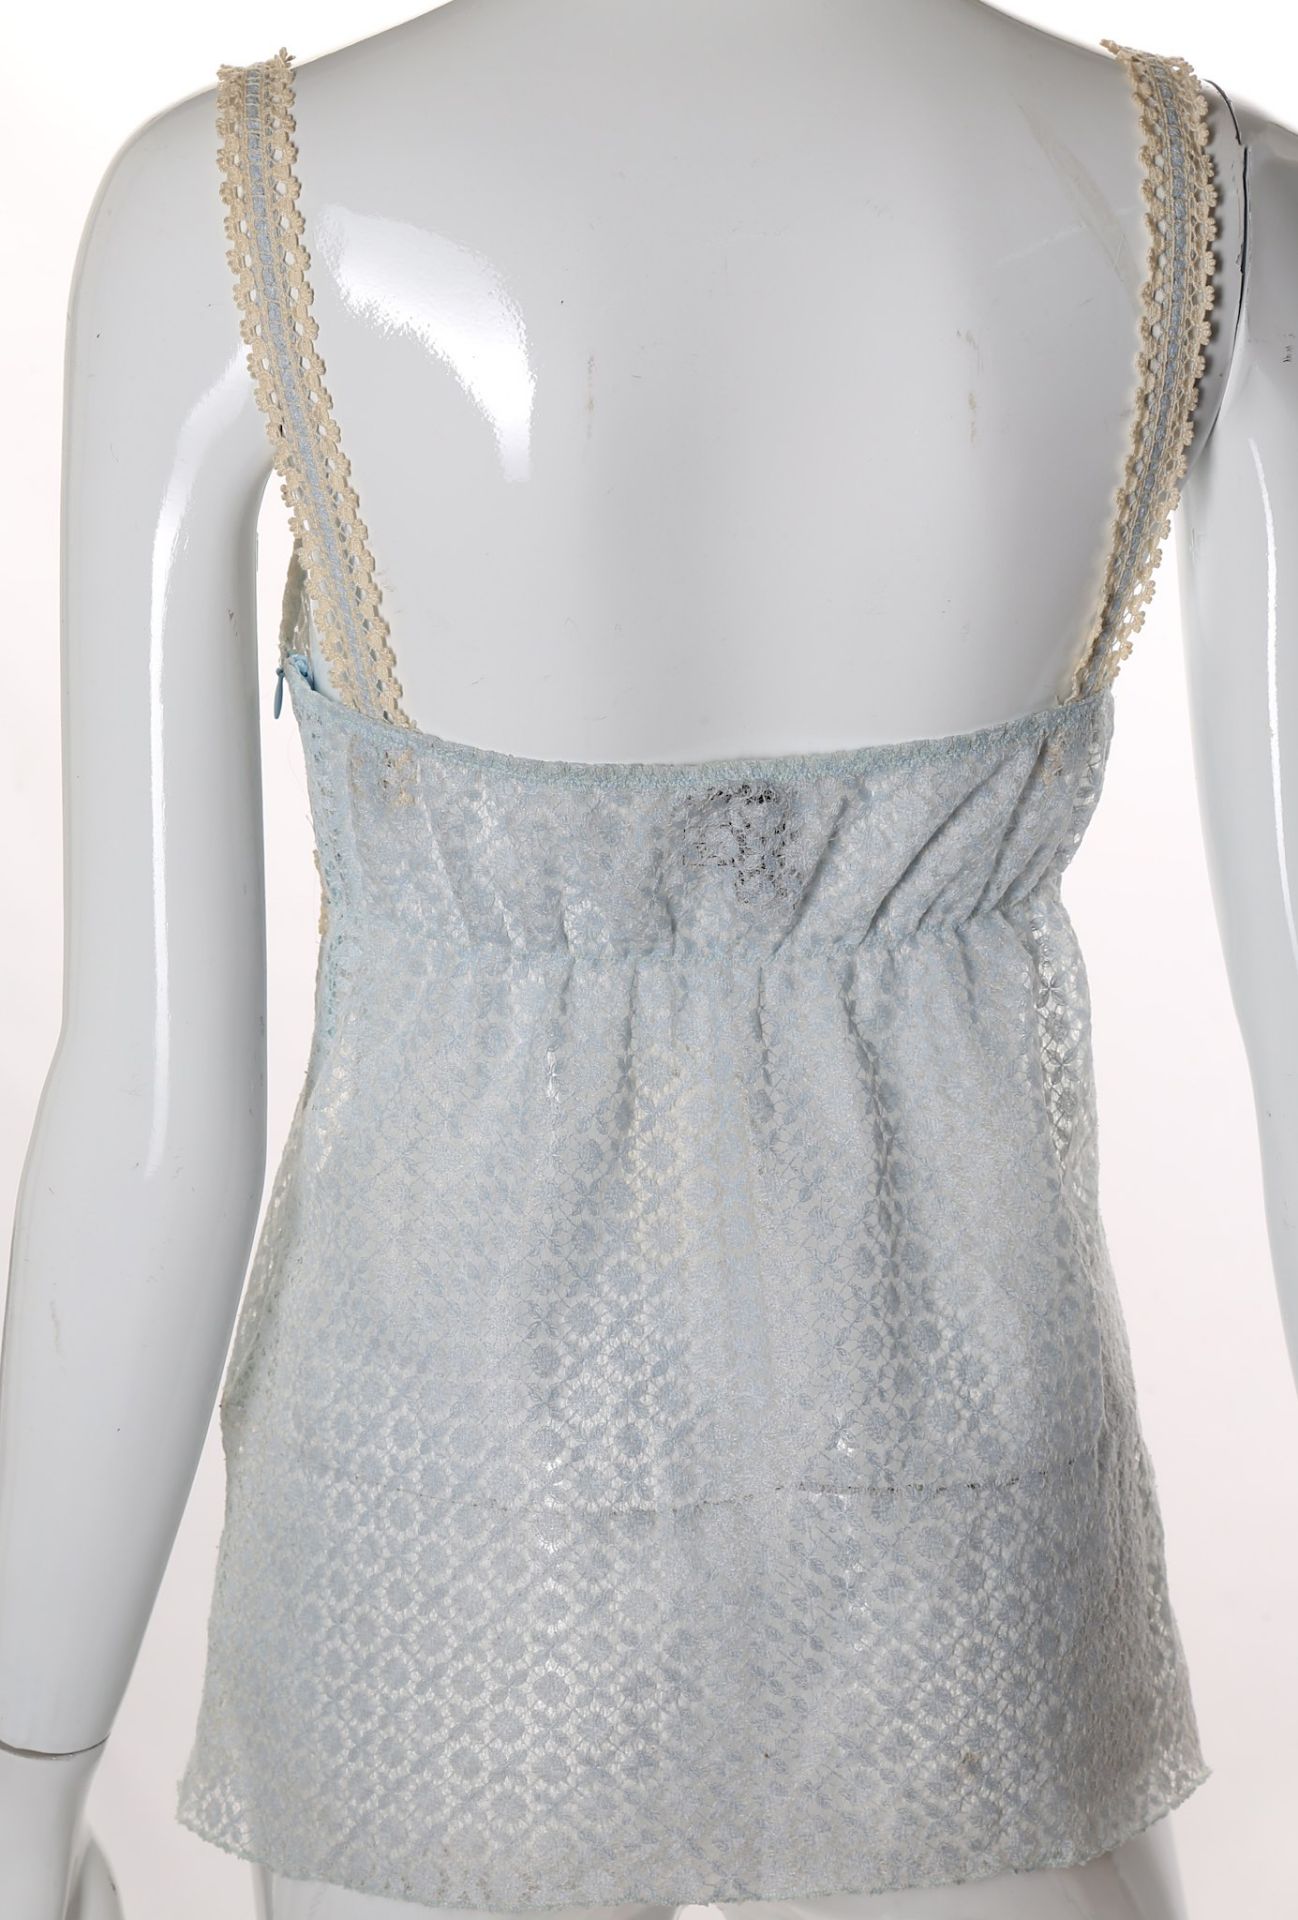 Chanel Baby Blue Lace Top, c. 2007, sleeveless des - Image 3 of 6